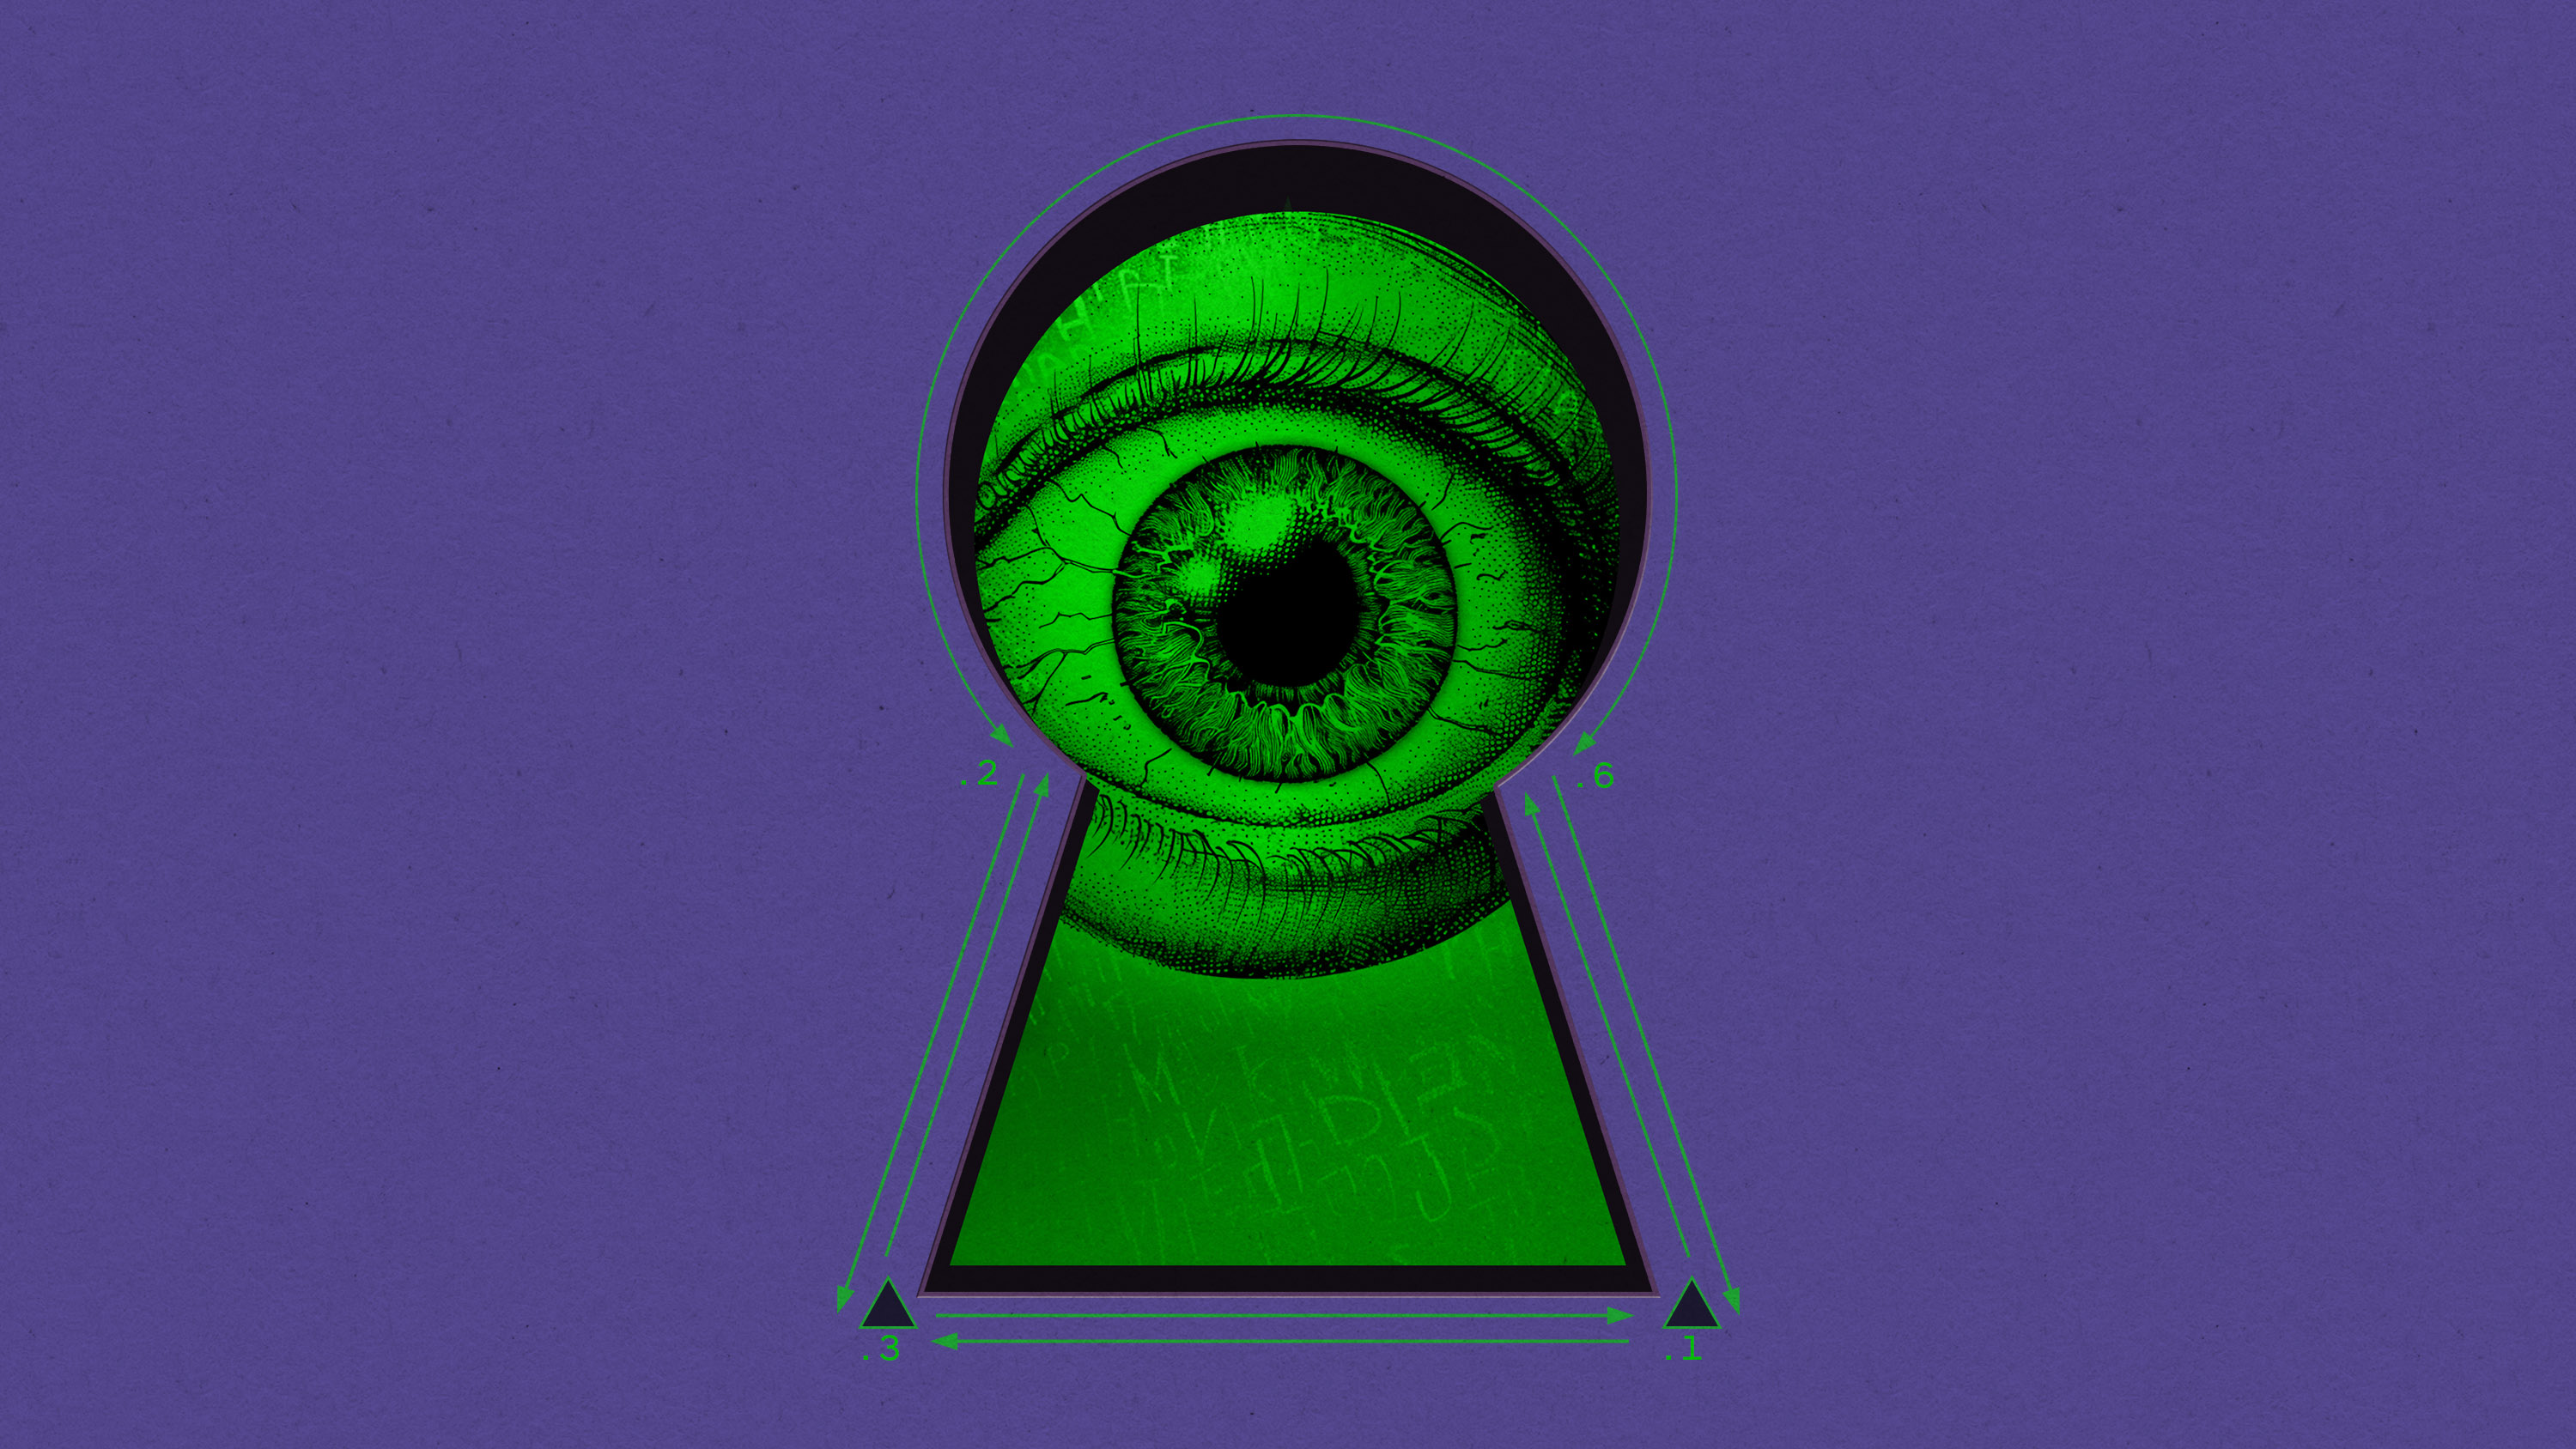 an eye looks through a keyhole ringed by Markov chain notations